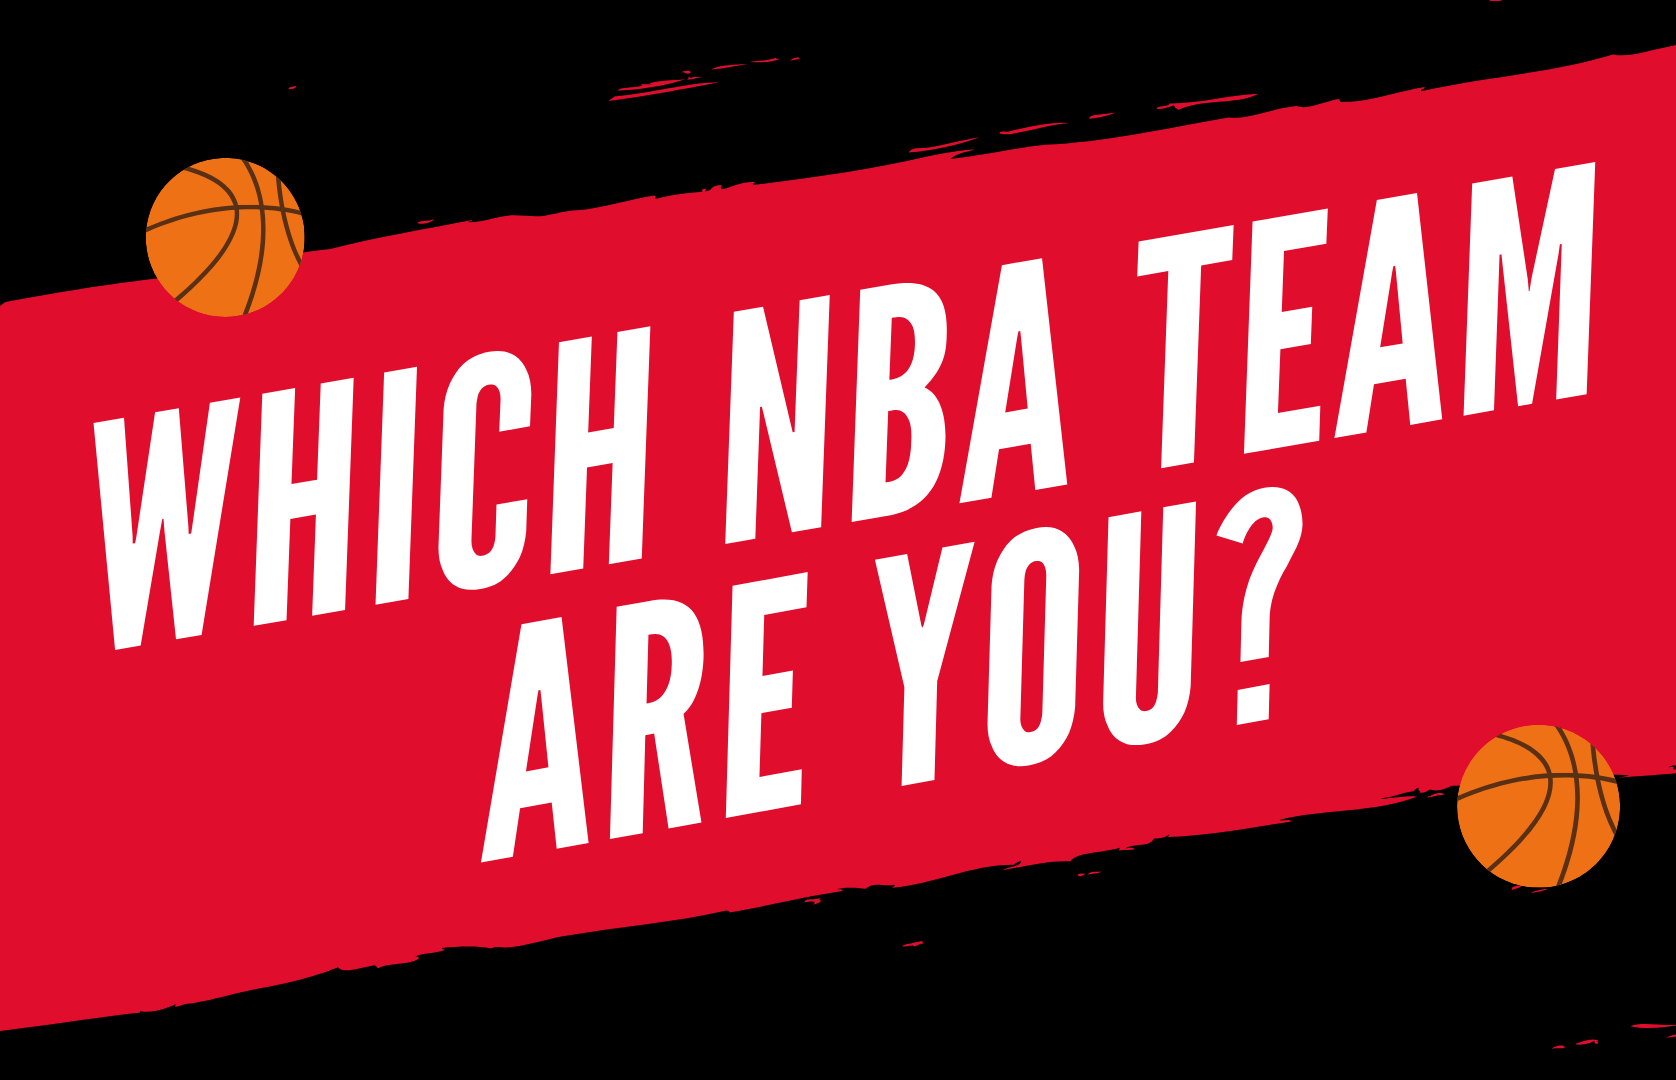 Which NBA Team Are You?